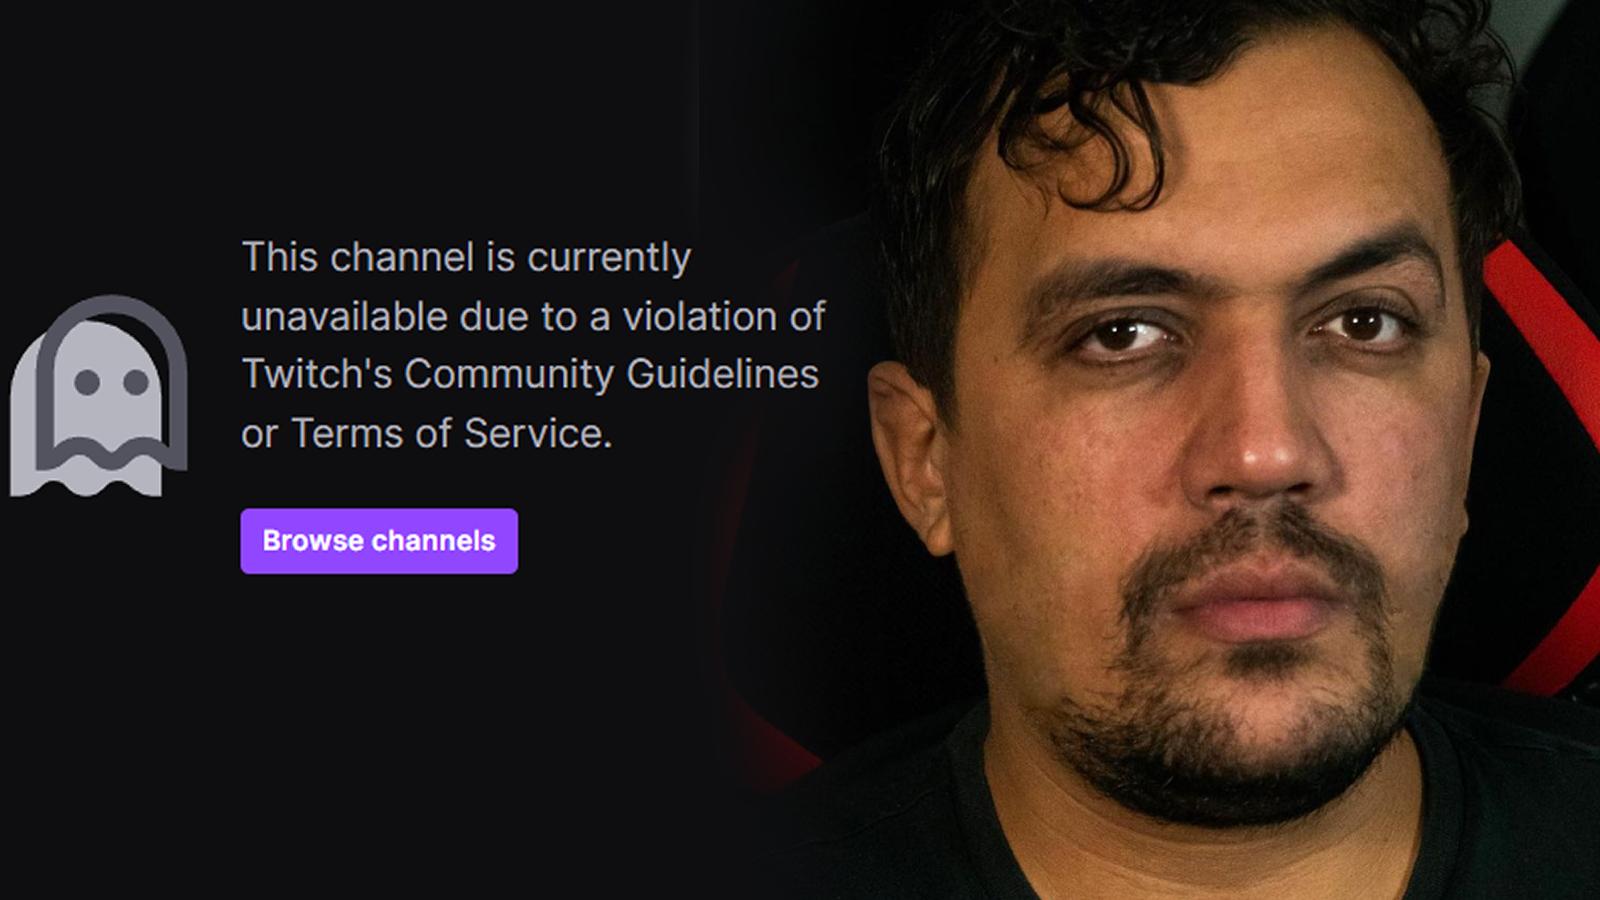 French content creator TheKairi78 banned on Twitch following rape allegations